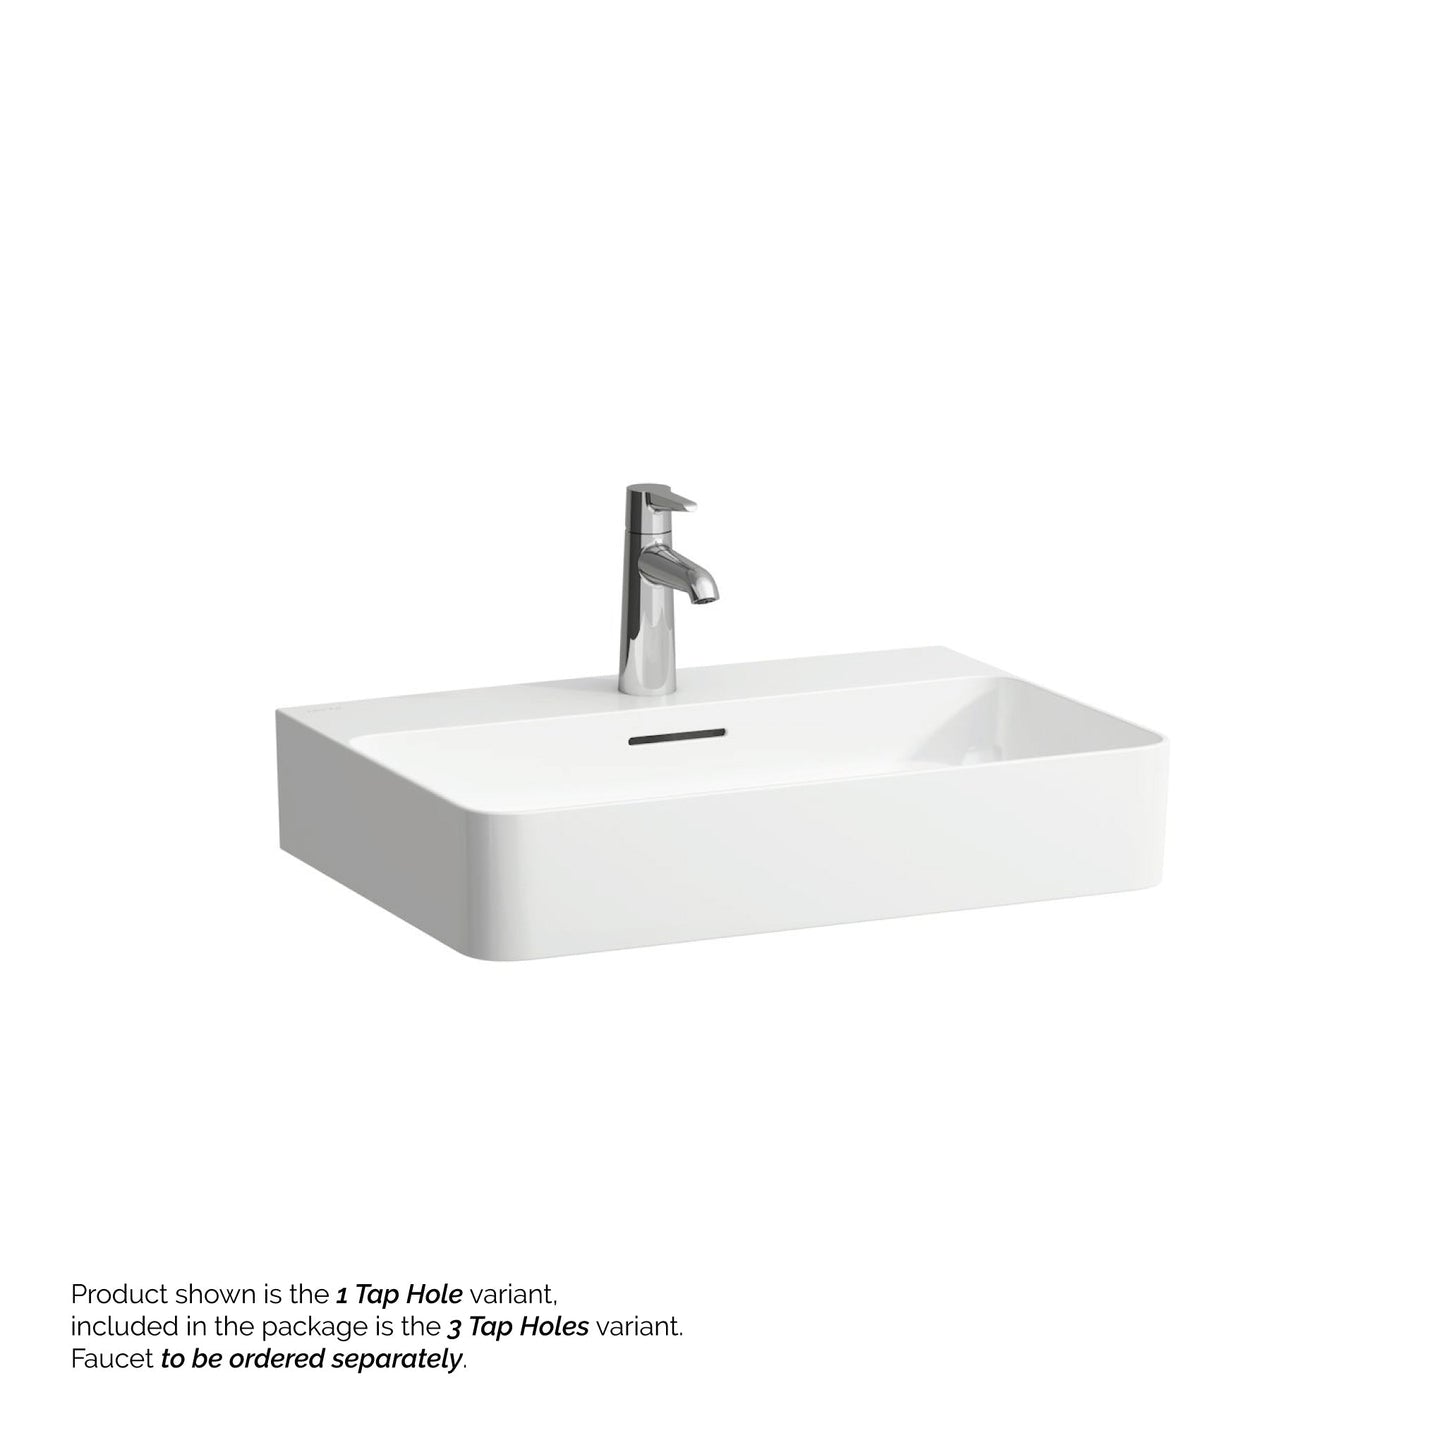 Laufen Val 24" x 17" Matte White Ceramic Countertop Bathroom Sink With 3 Faucet Holes